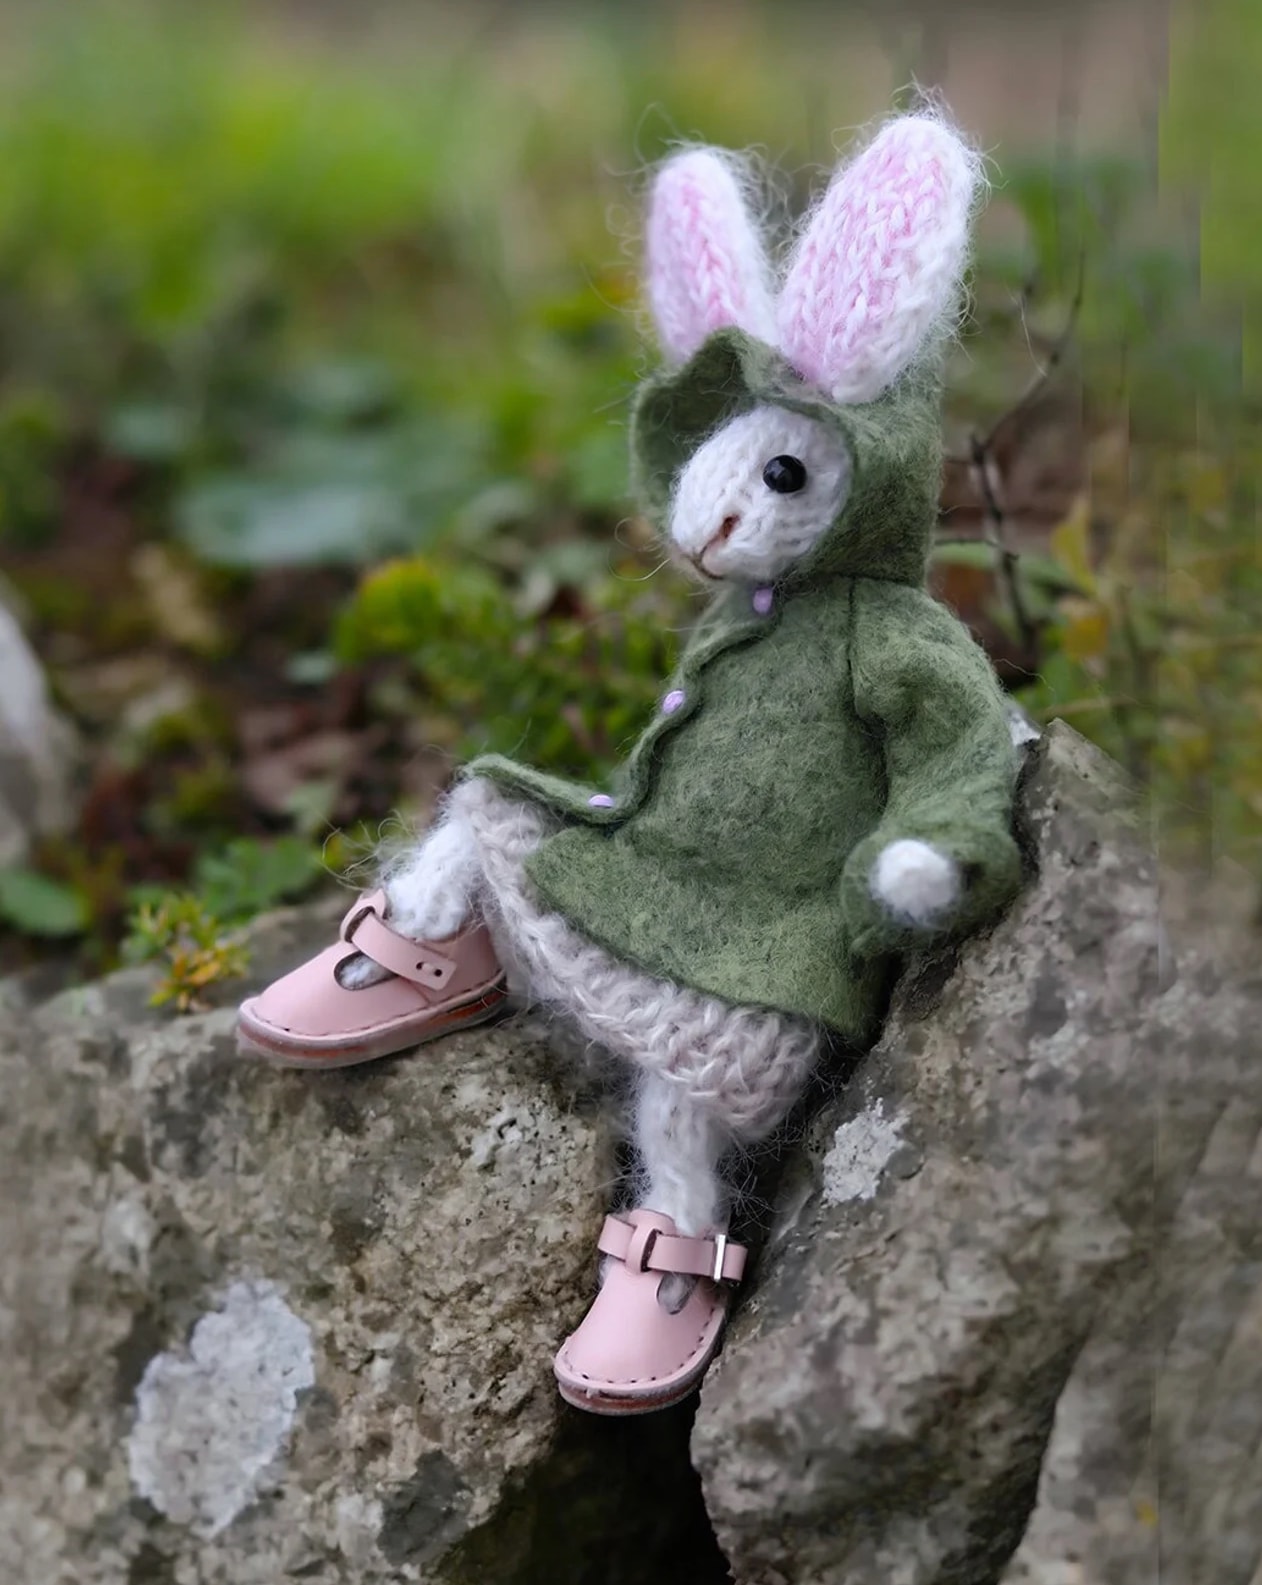 rabbit doll knitting pattern by claire garland of dot pebbles knits - available to buy as a PDF pattern on Etsy at a special introductory price. Click through to get all the info you need and don't miss out on your free baby bunny knitting pattern too!